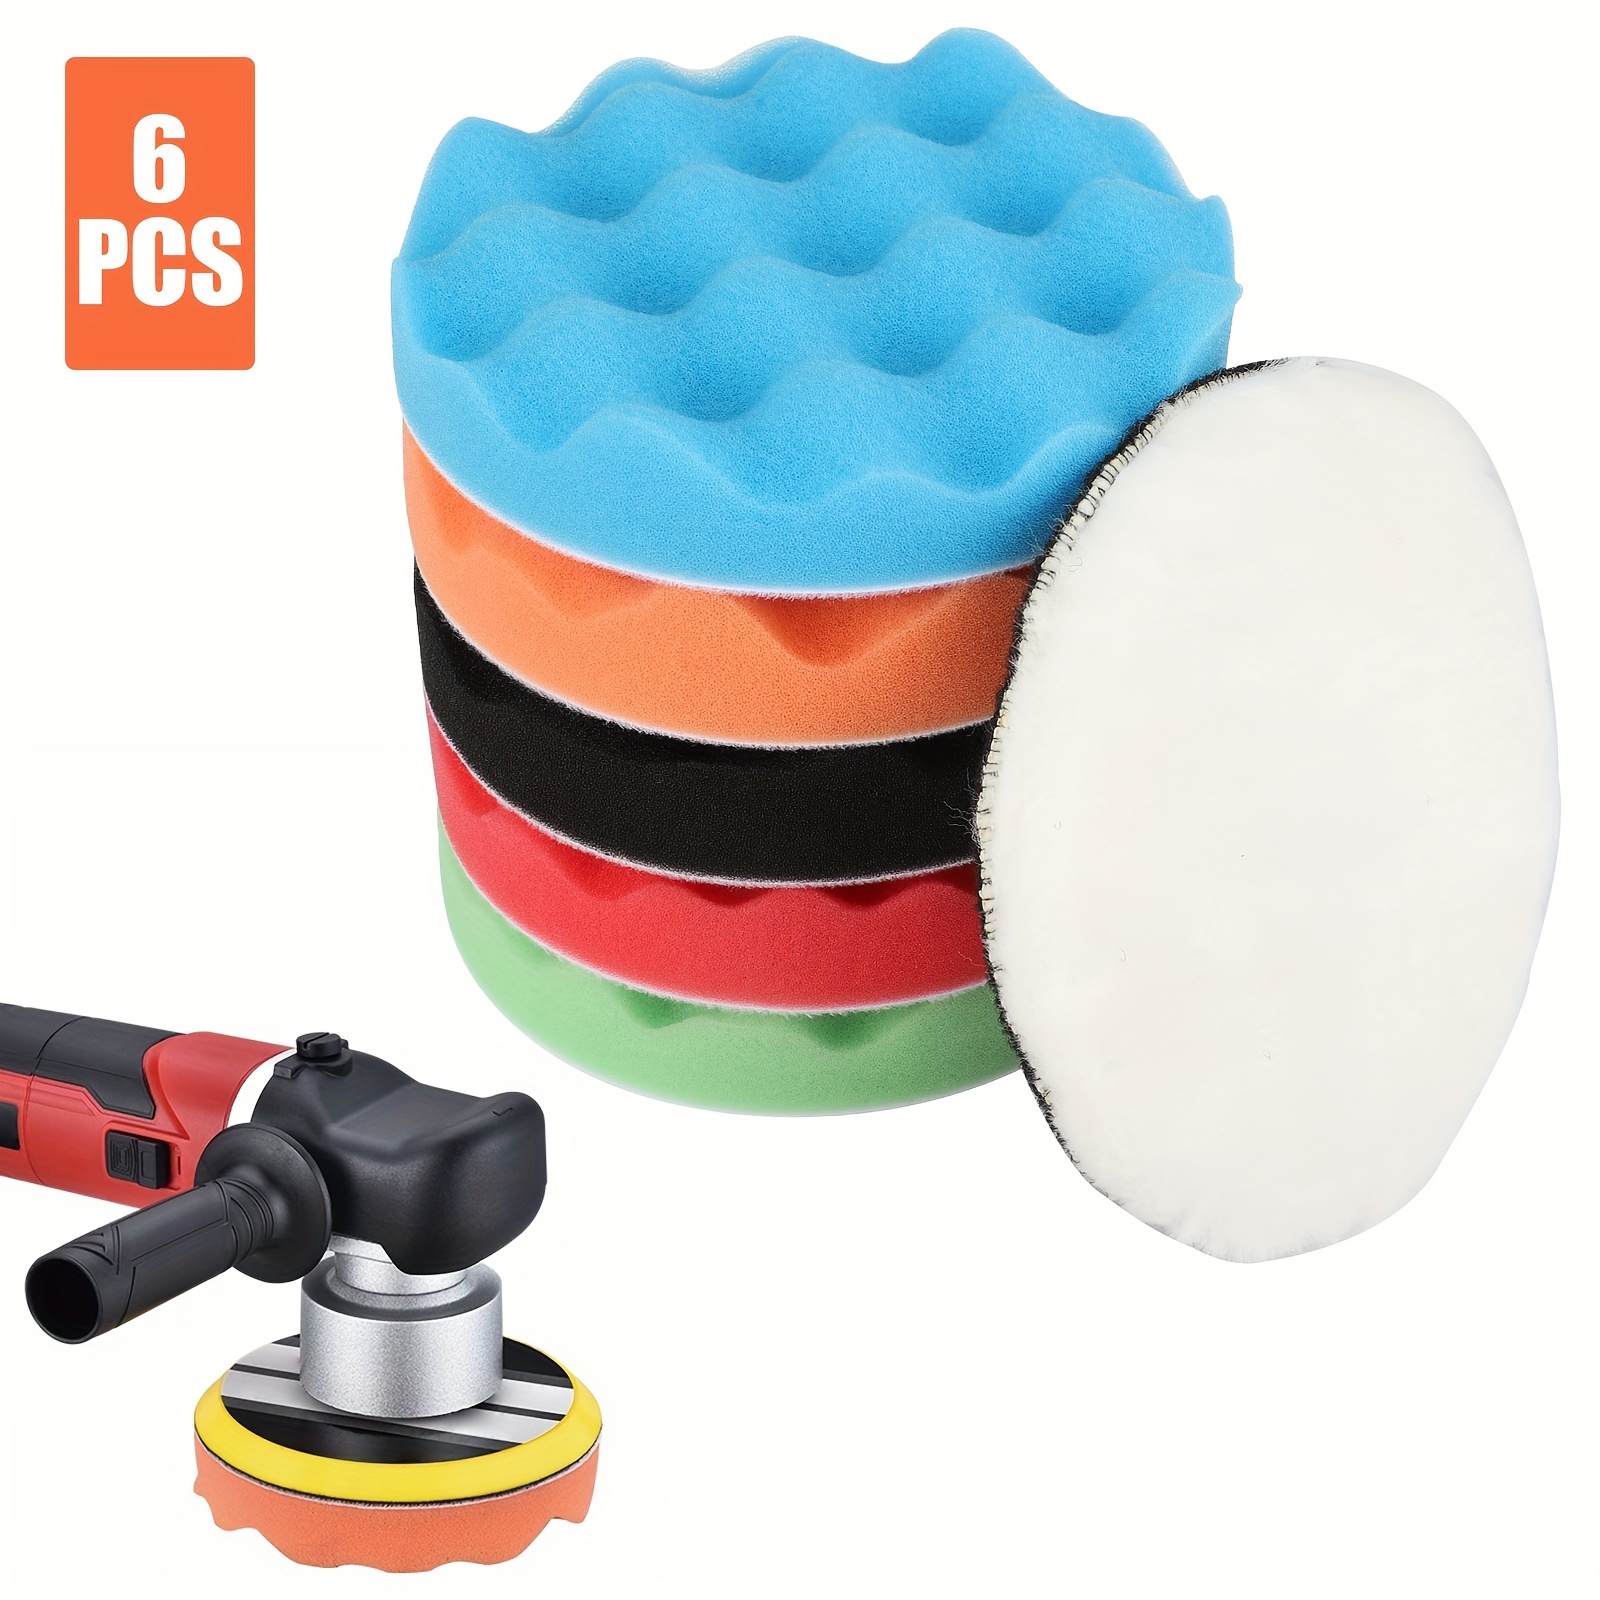 

6pcs/set 6 Inch Car Buffing Pads Polishing For Drill Sponge Kit Waxing Foam Polisher Cleaning Supplies Tools